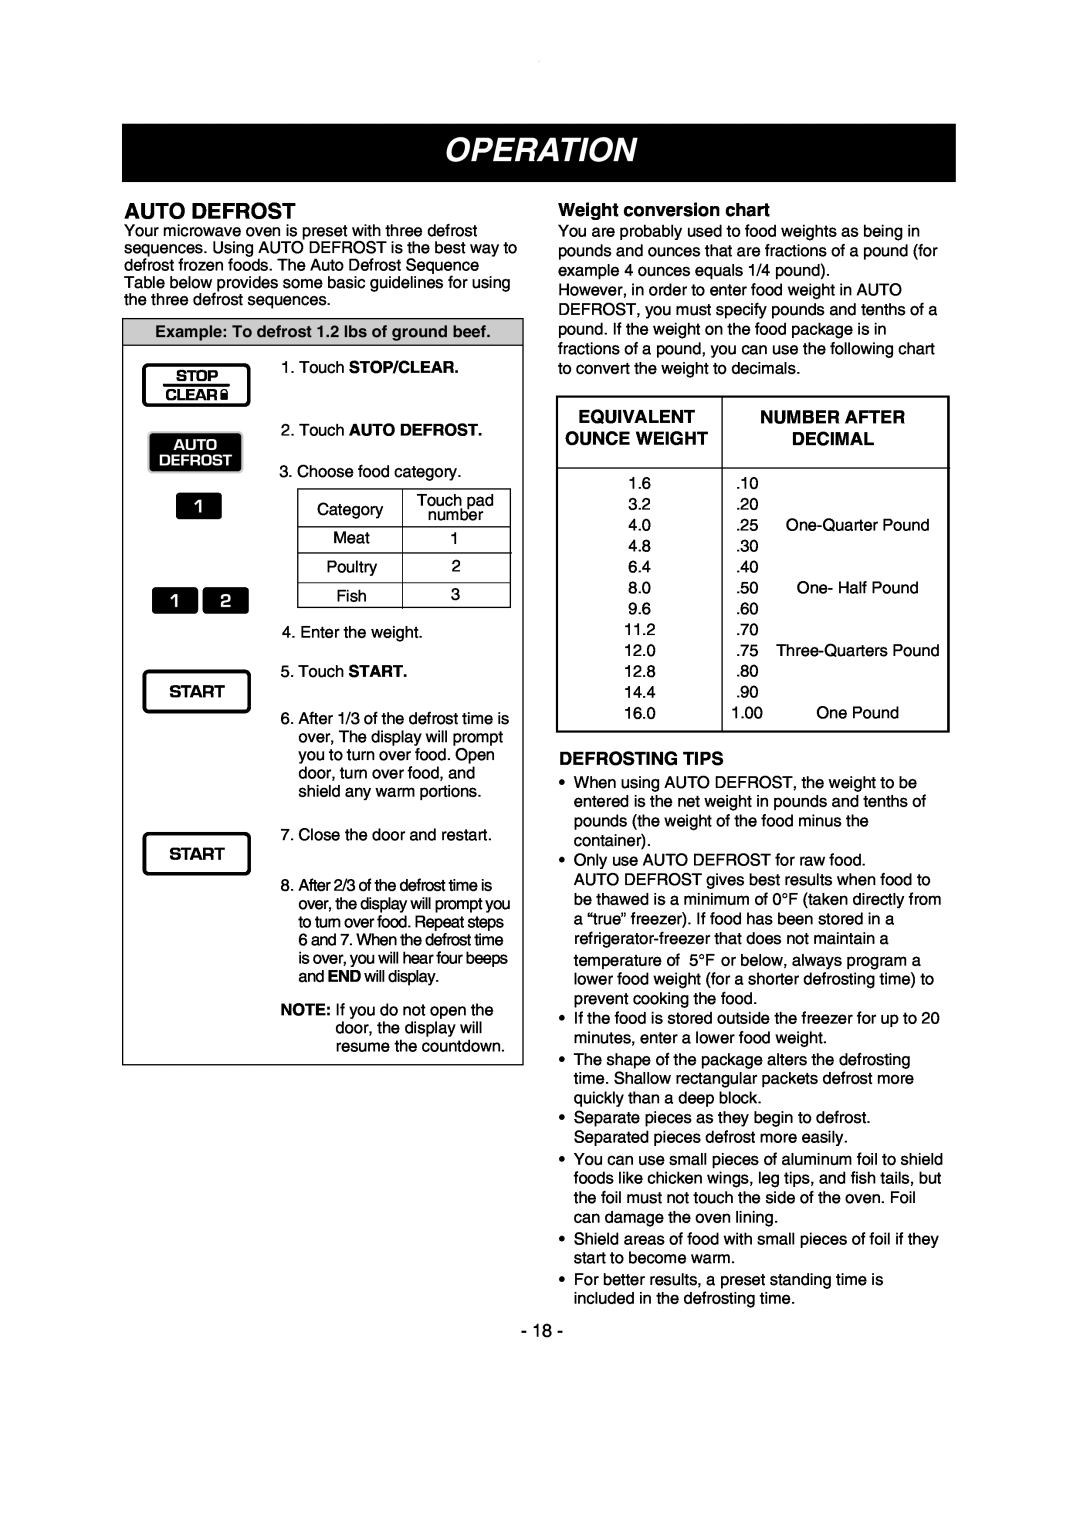 LG Electronics LMV1635SW Auto Defrost, Operation, Weight conversion chart, Equivalent, Number After, Ounce Weight, Decimal 